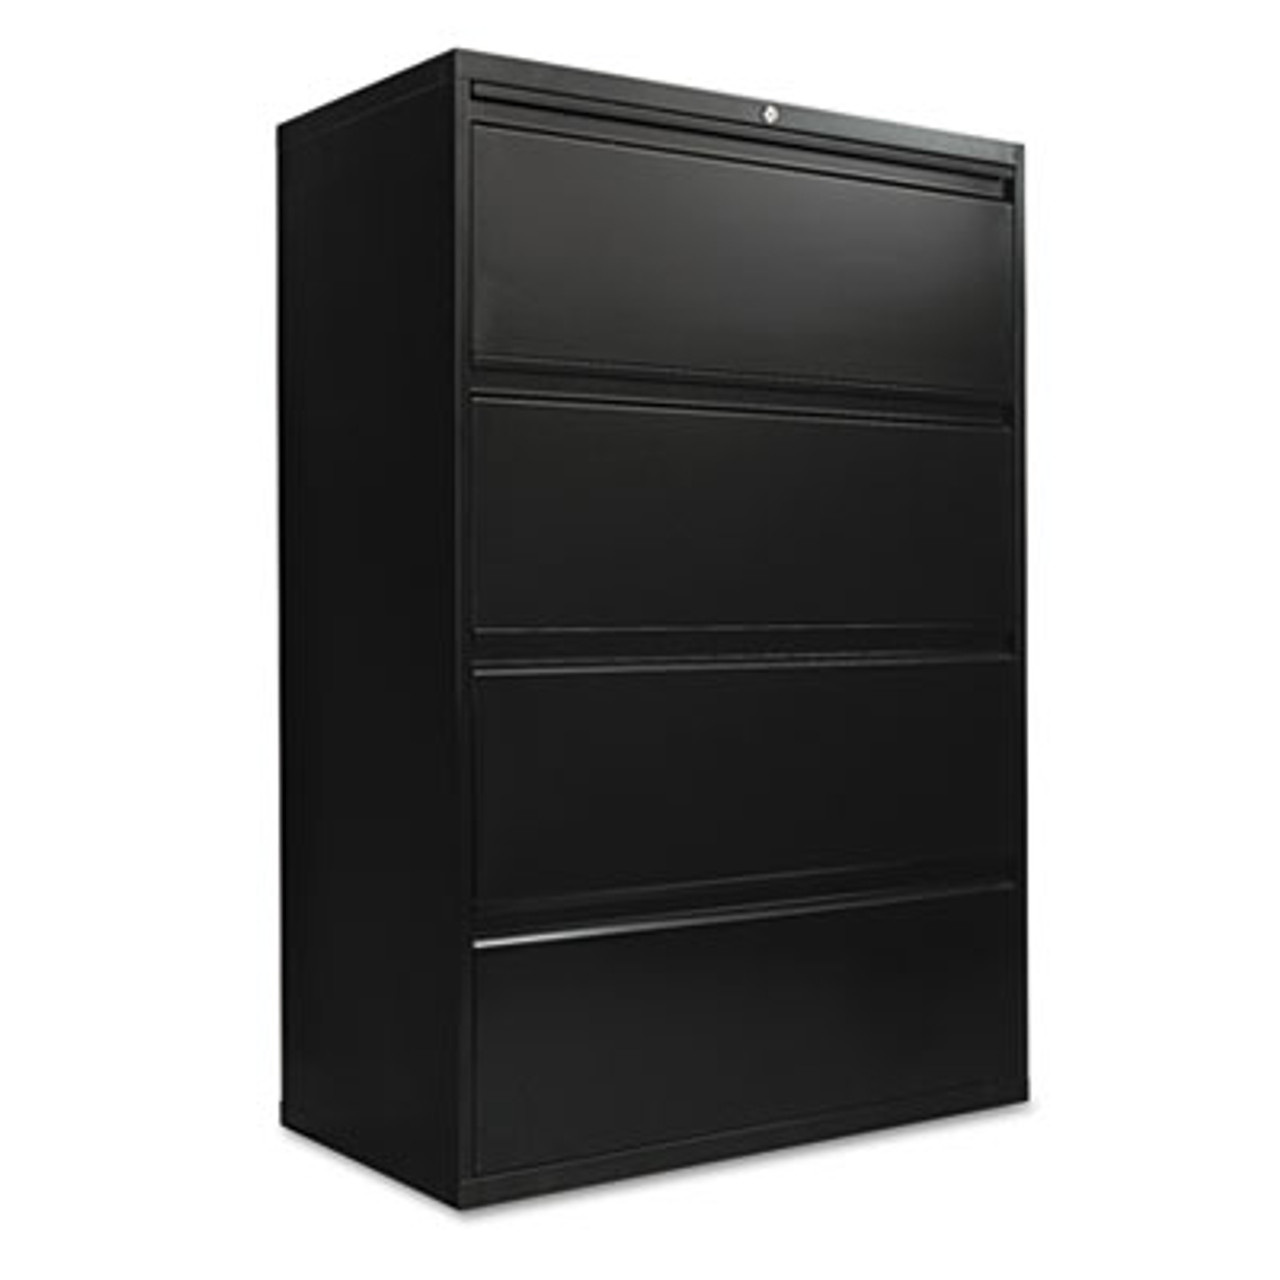 Four-Drawer Lateral File Cabinet, 36w x 19-1/4d x 53-1/4h, Black